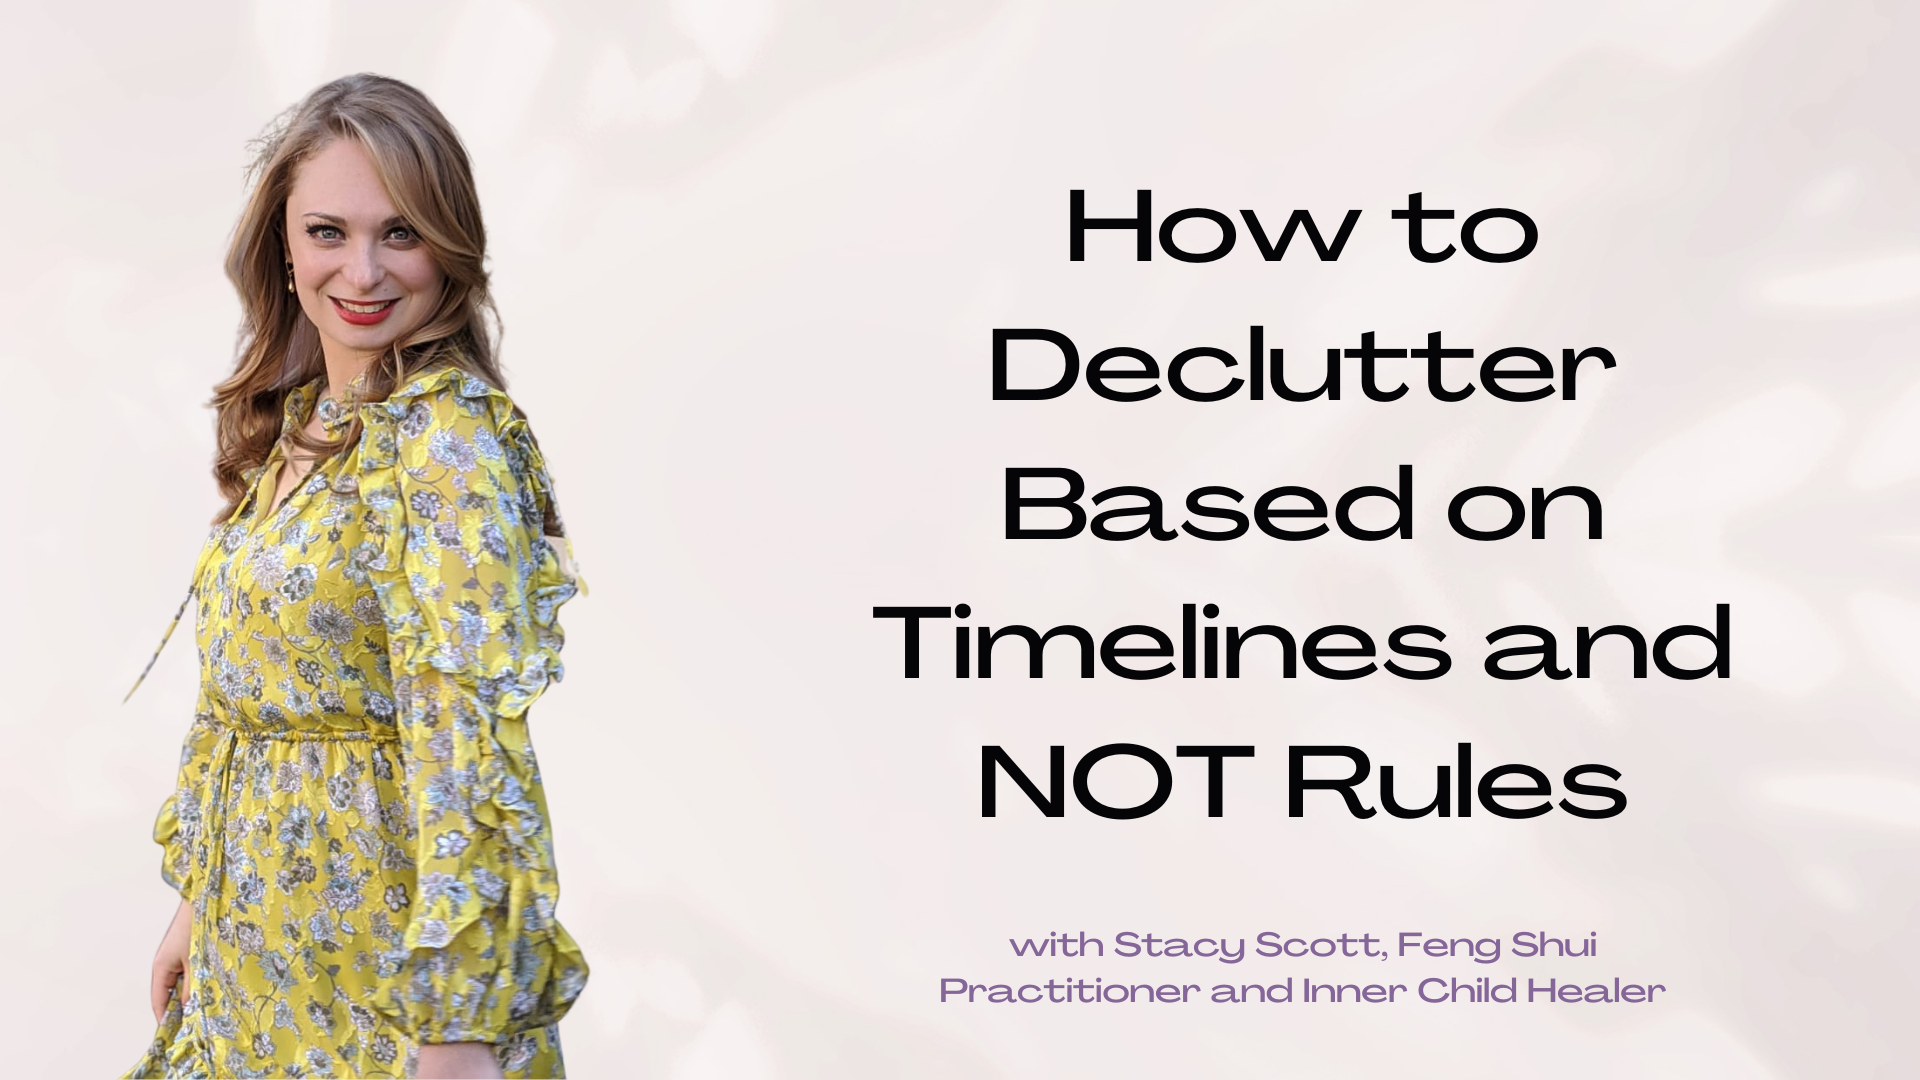 How to Declutter Based on Timelines and NOT Rules